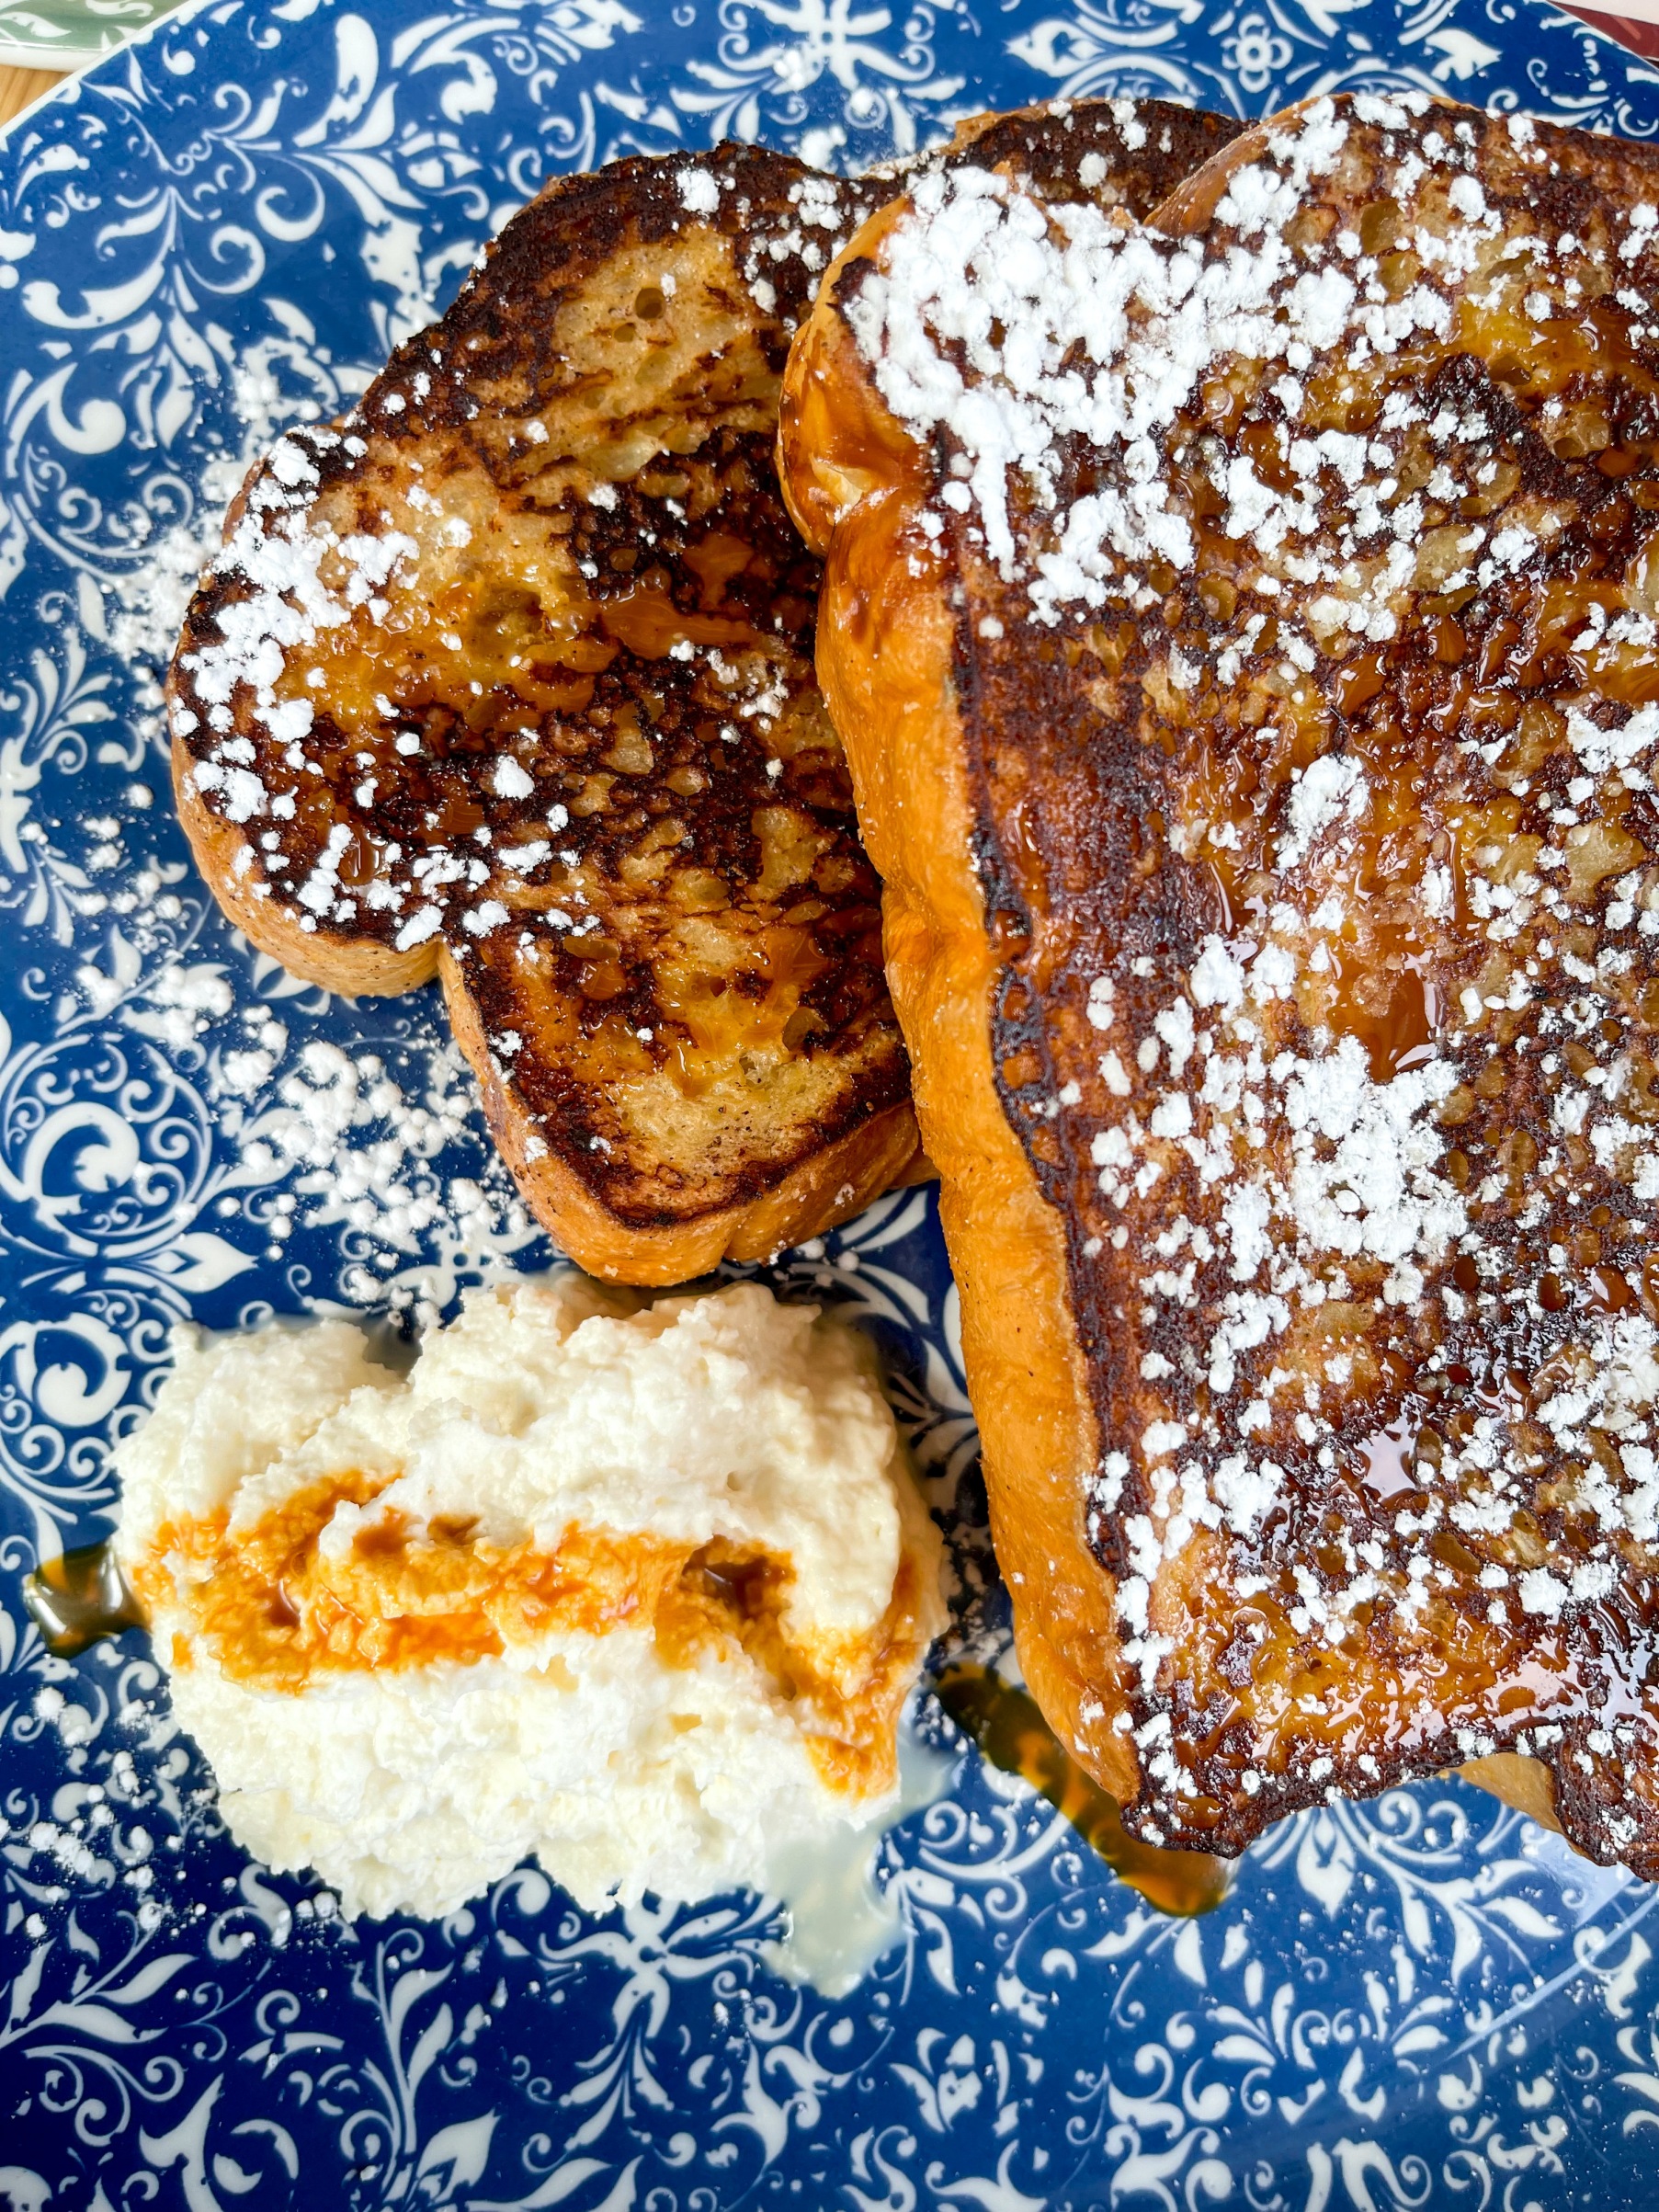 Two large slices of French toast with a side of Chantilly cream on a plate